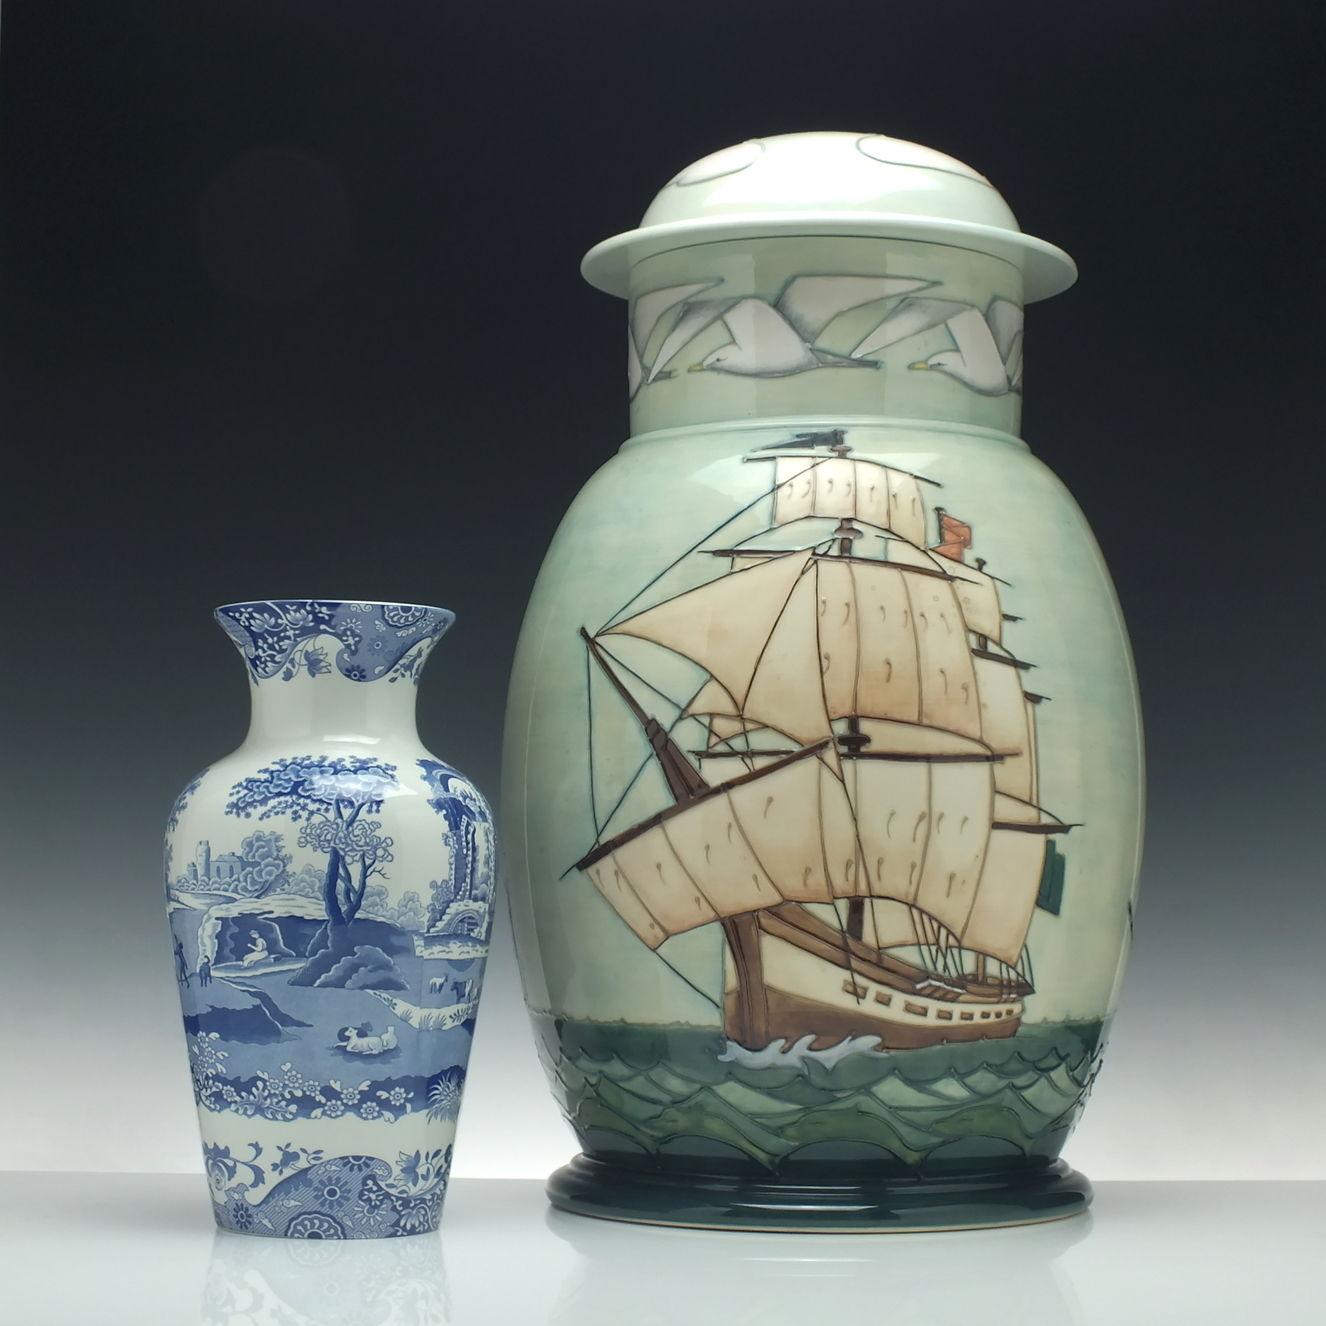 A large and exceptionally rare, limited edition, ‘First Fleet – HMS Sirius’ Moorcroft jar and cover.

Number 14 of only 25 ever made, it measures 52cm tall and 30cm in diameter and has been in the same family collection since it was made in 1988.